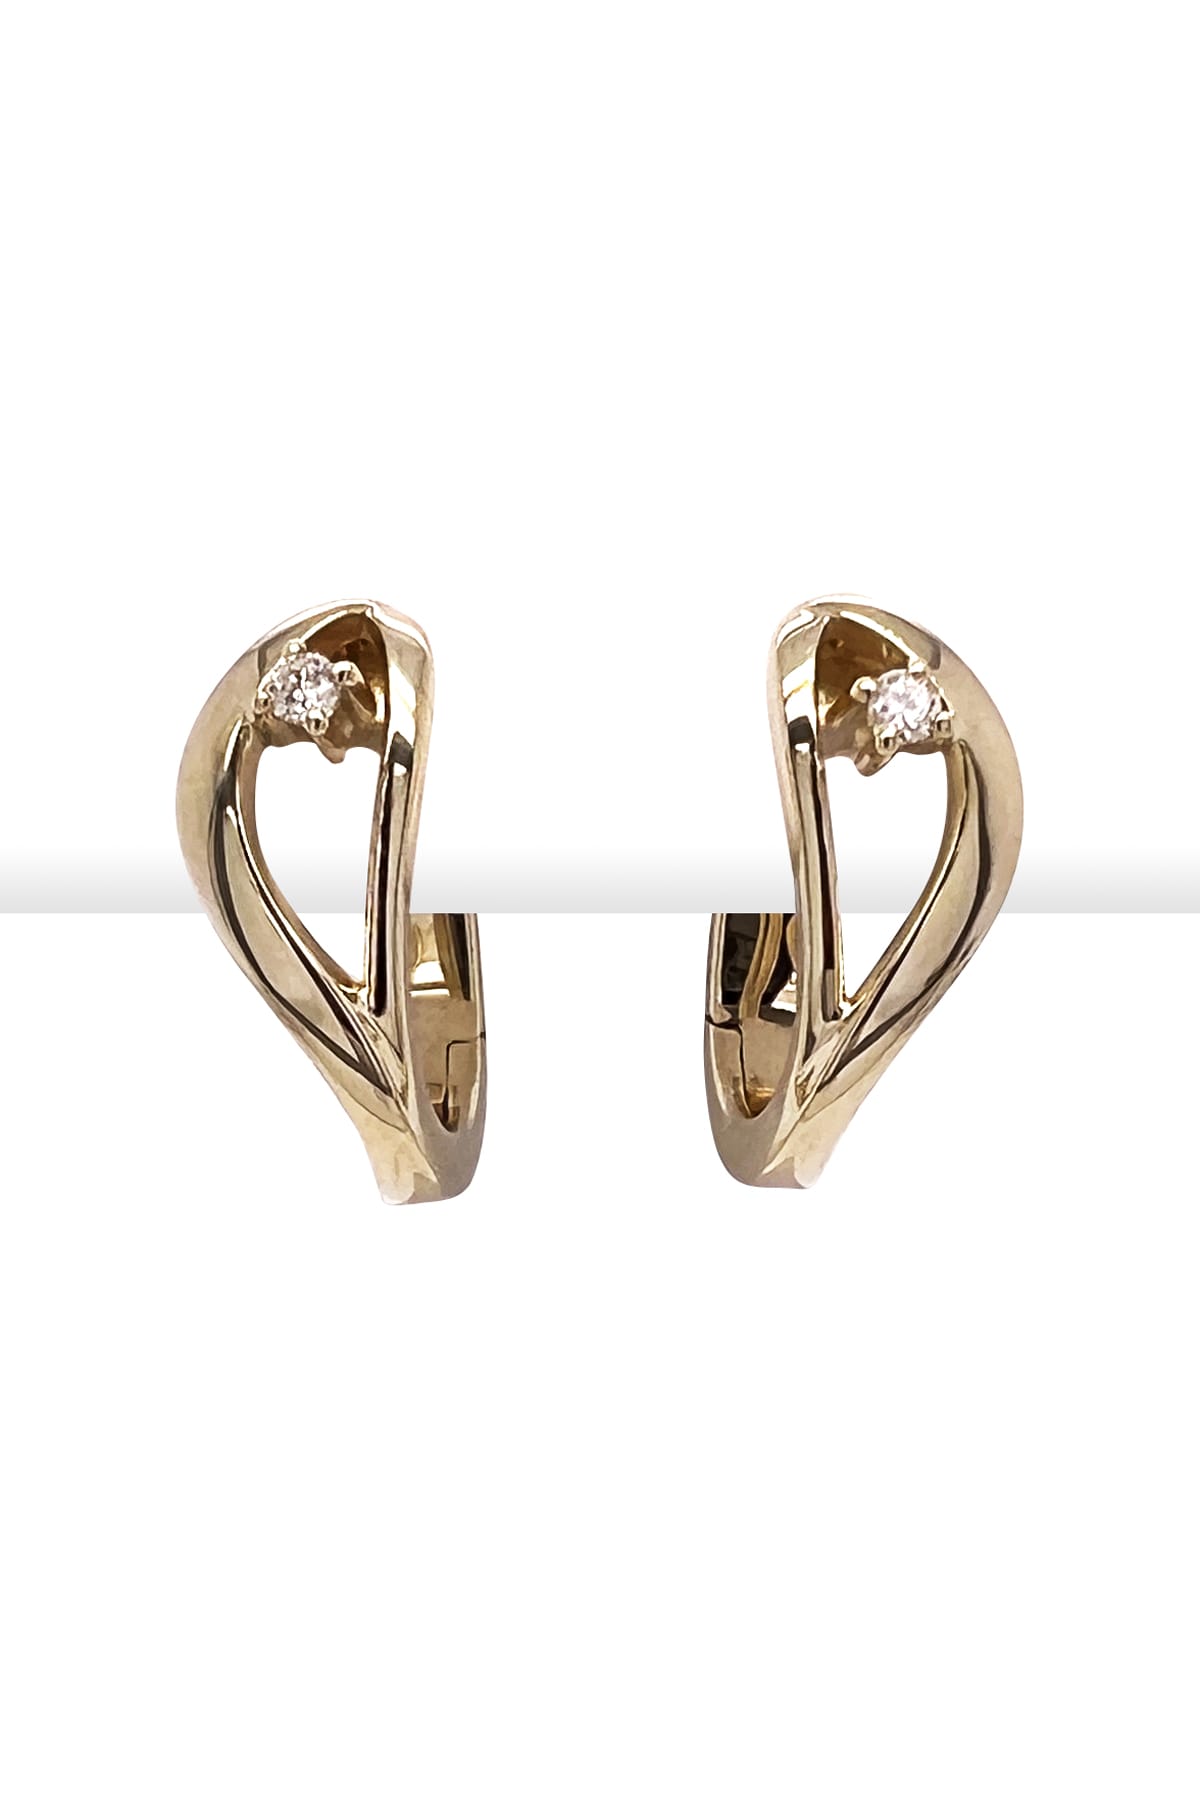 9ct Yellow Gold Fancy Oval Style Huggie Earrings available at LeGassick Diamonds and Jewellery Gold Coast, Australia.